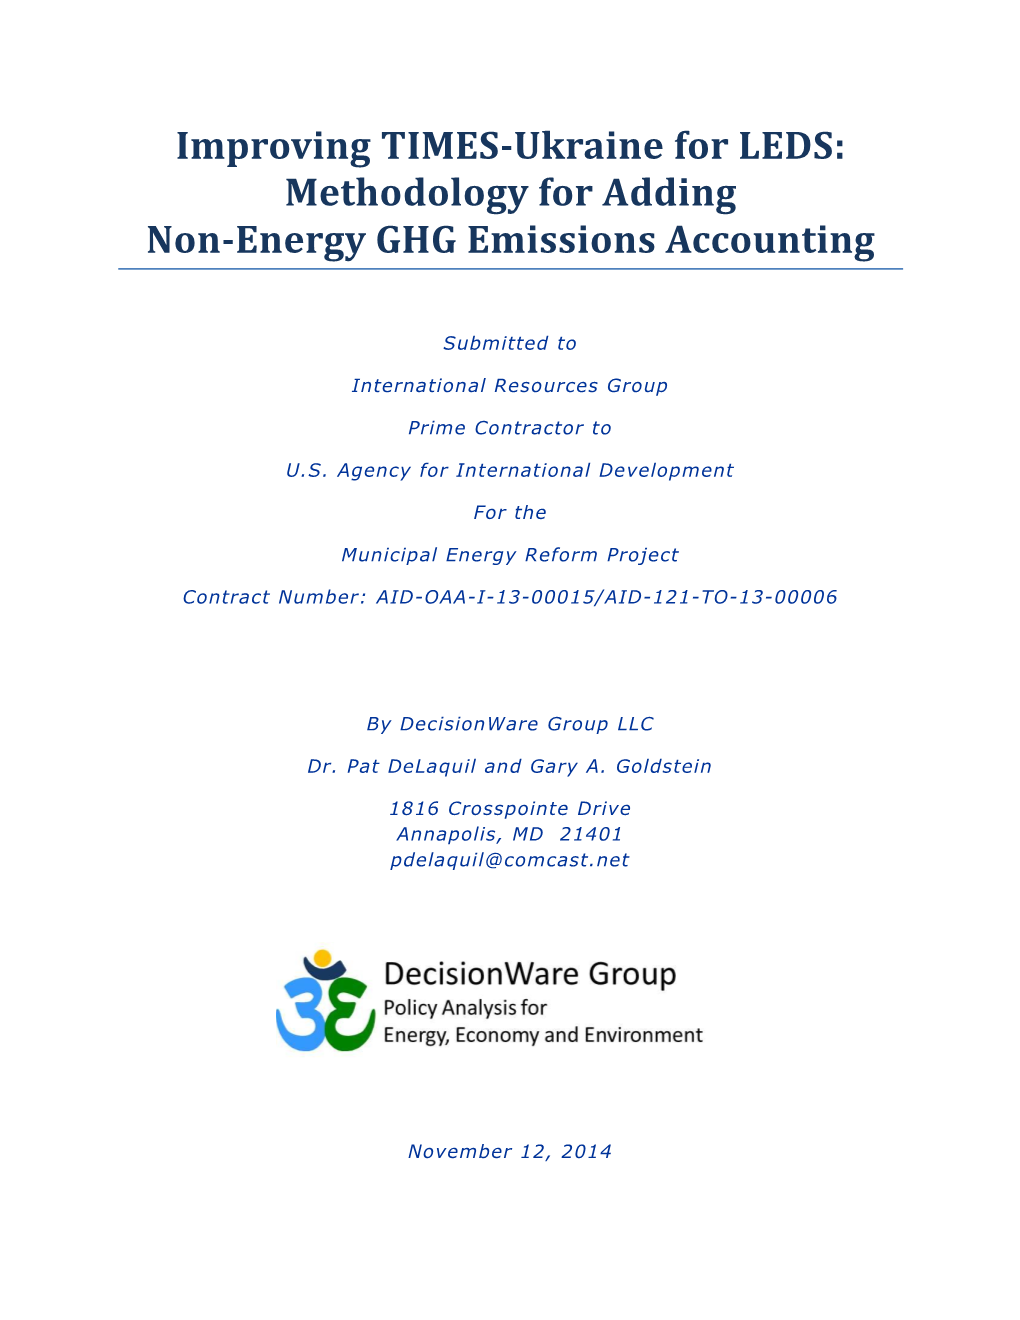 Methodology for Adding Non-Energy GHG Emissions Accounting